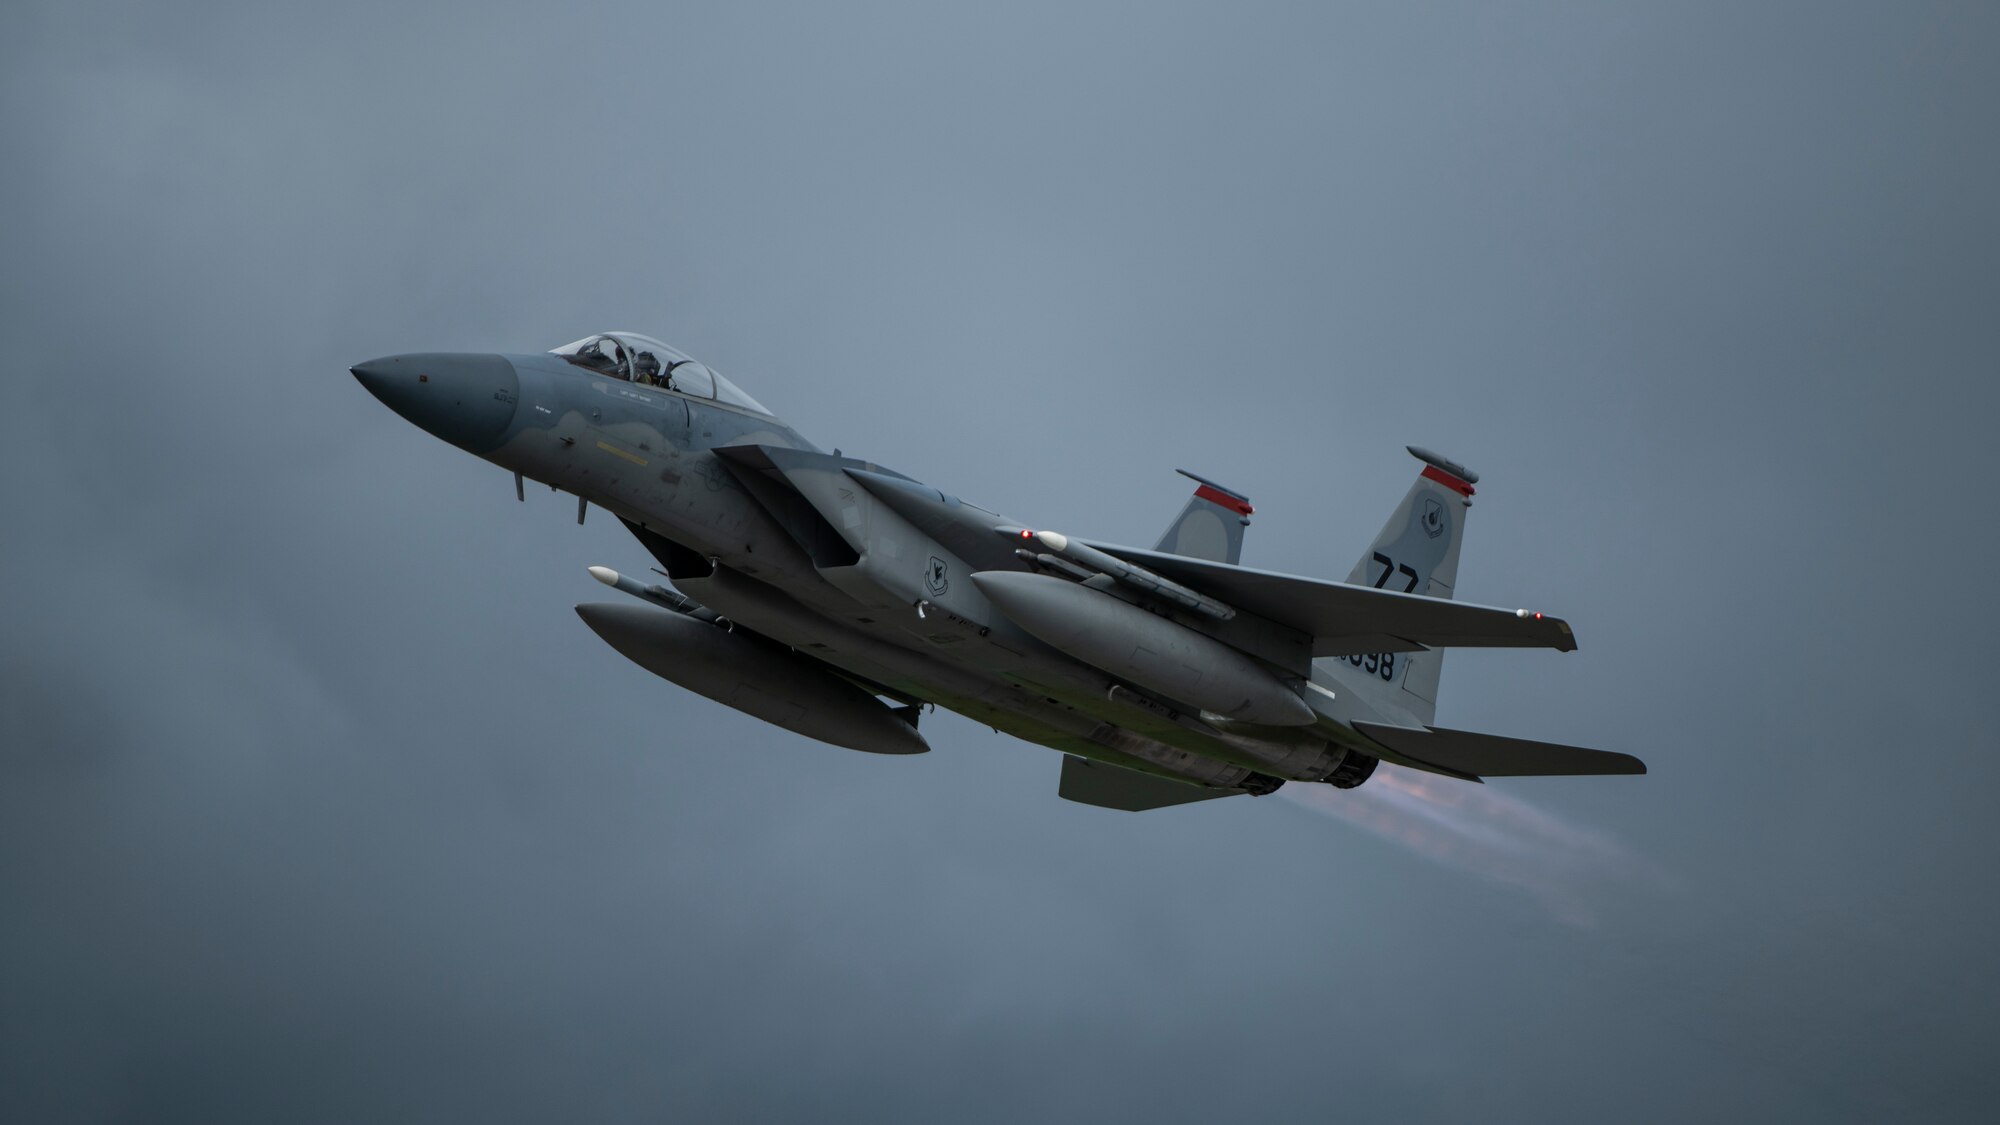 A U.S. Air Force 67th Fighter Squadron F-15C Eagle takes off for a training mission Sept. 14, 2020, at Kadena Air Base, Japan. Team Kadena pilots train every day to ensure readiness and mission effectiveness to support a free and open Indo-Pacific.